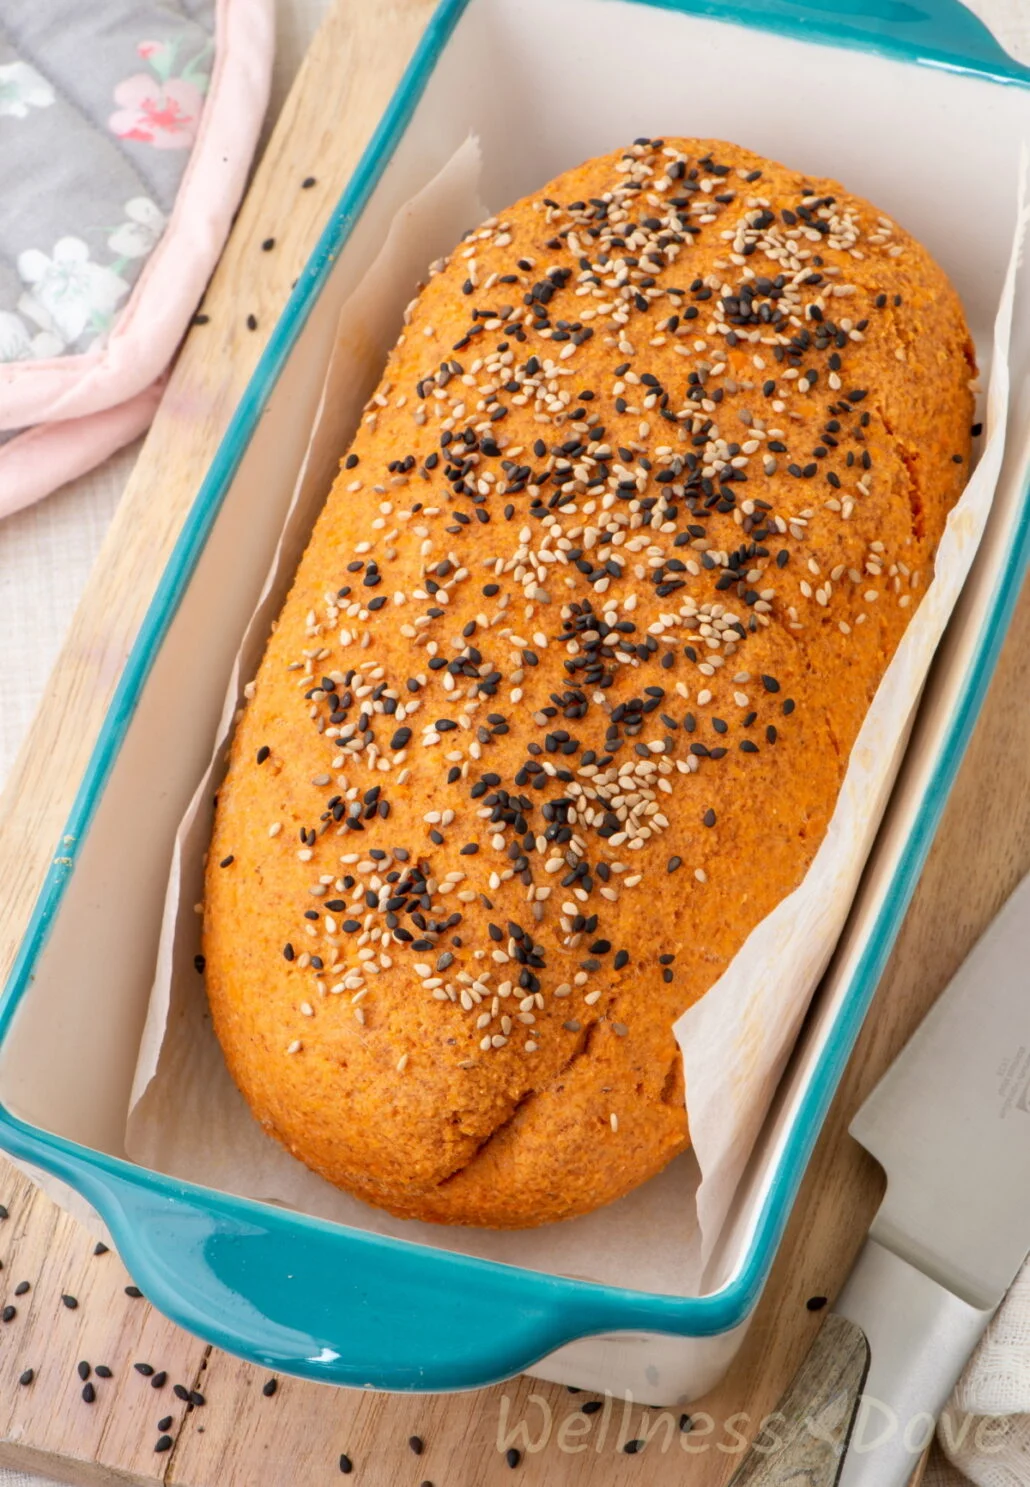 the loaf of vegan gluten free lentil bread in a baking tray